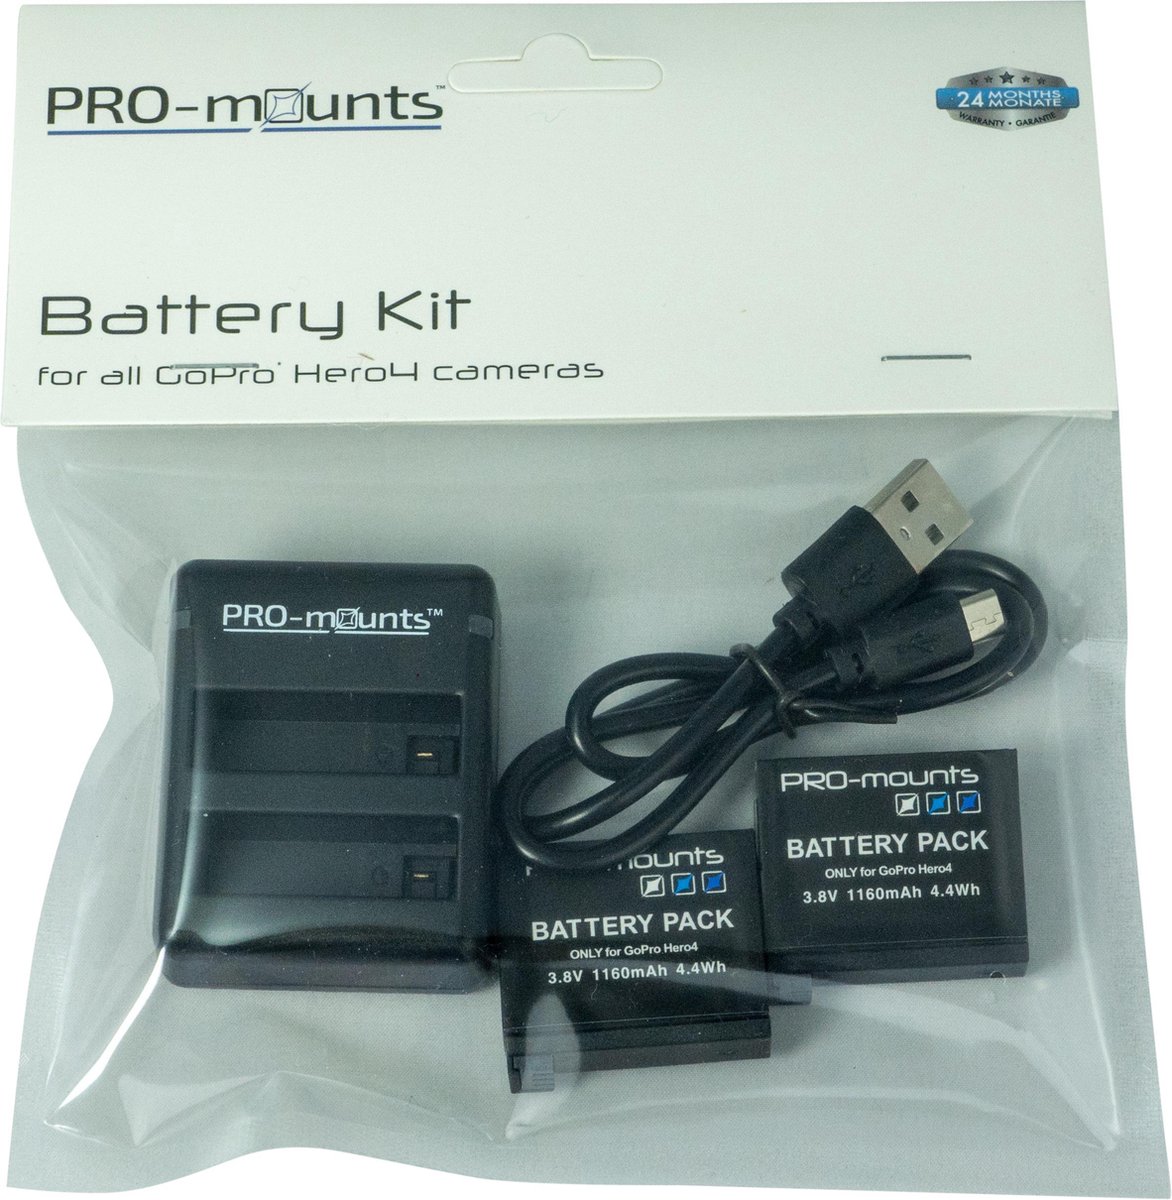 PRO-mounts Dual Charger Battery Kit voor GoPro* Hero4 camera